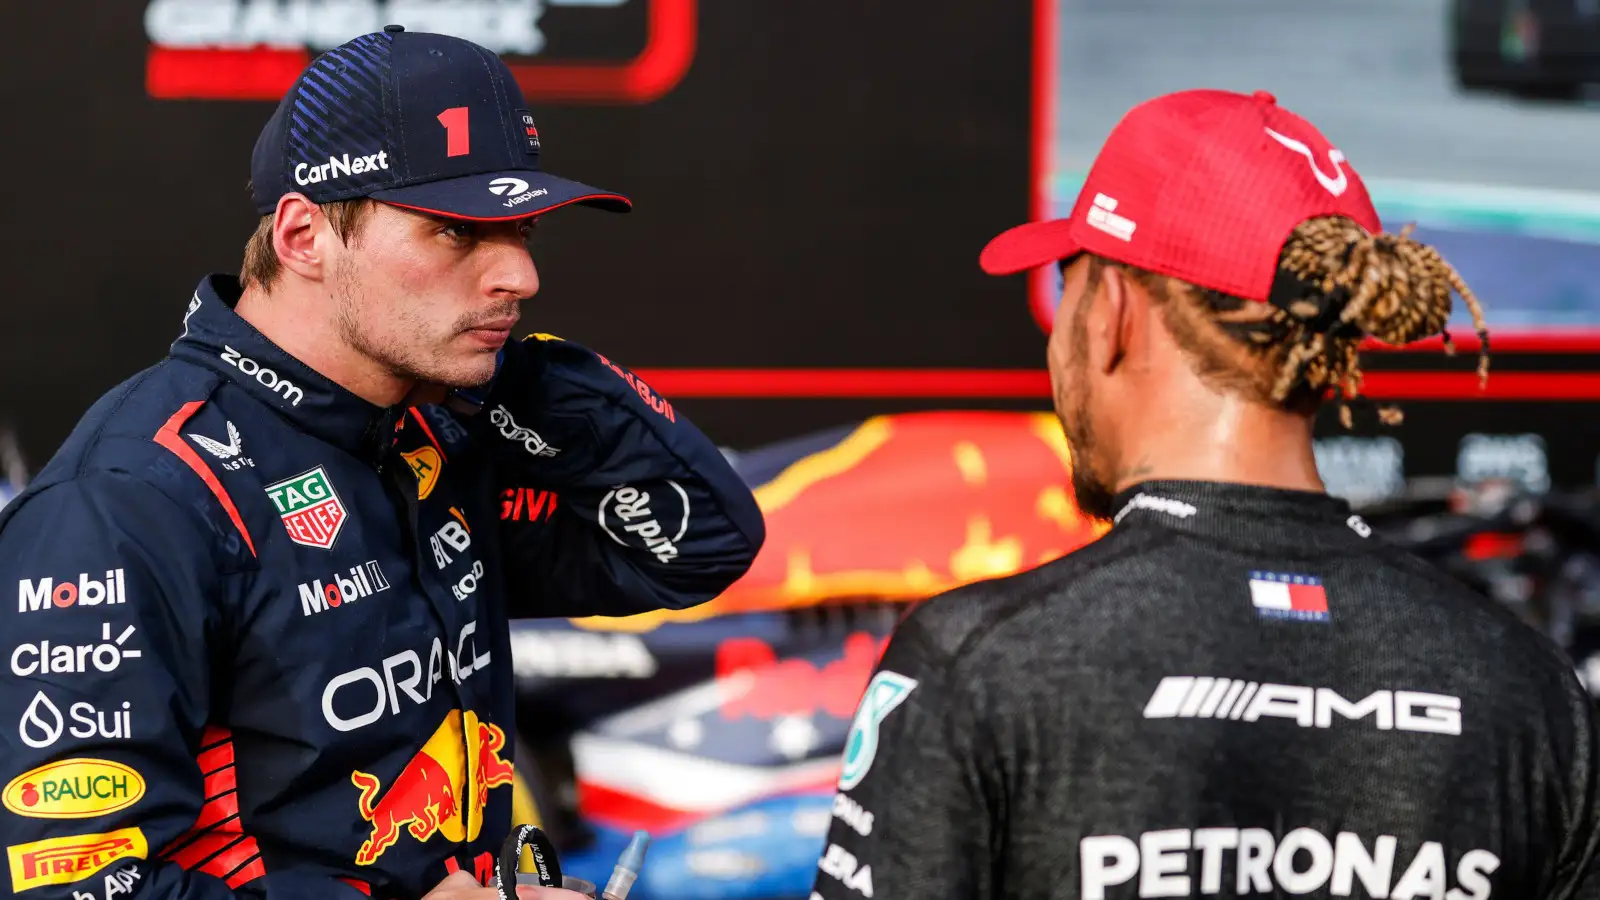 Race winner Max Verstappen speaking with Lewis Hamilton after the race.